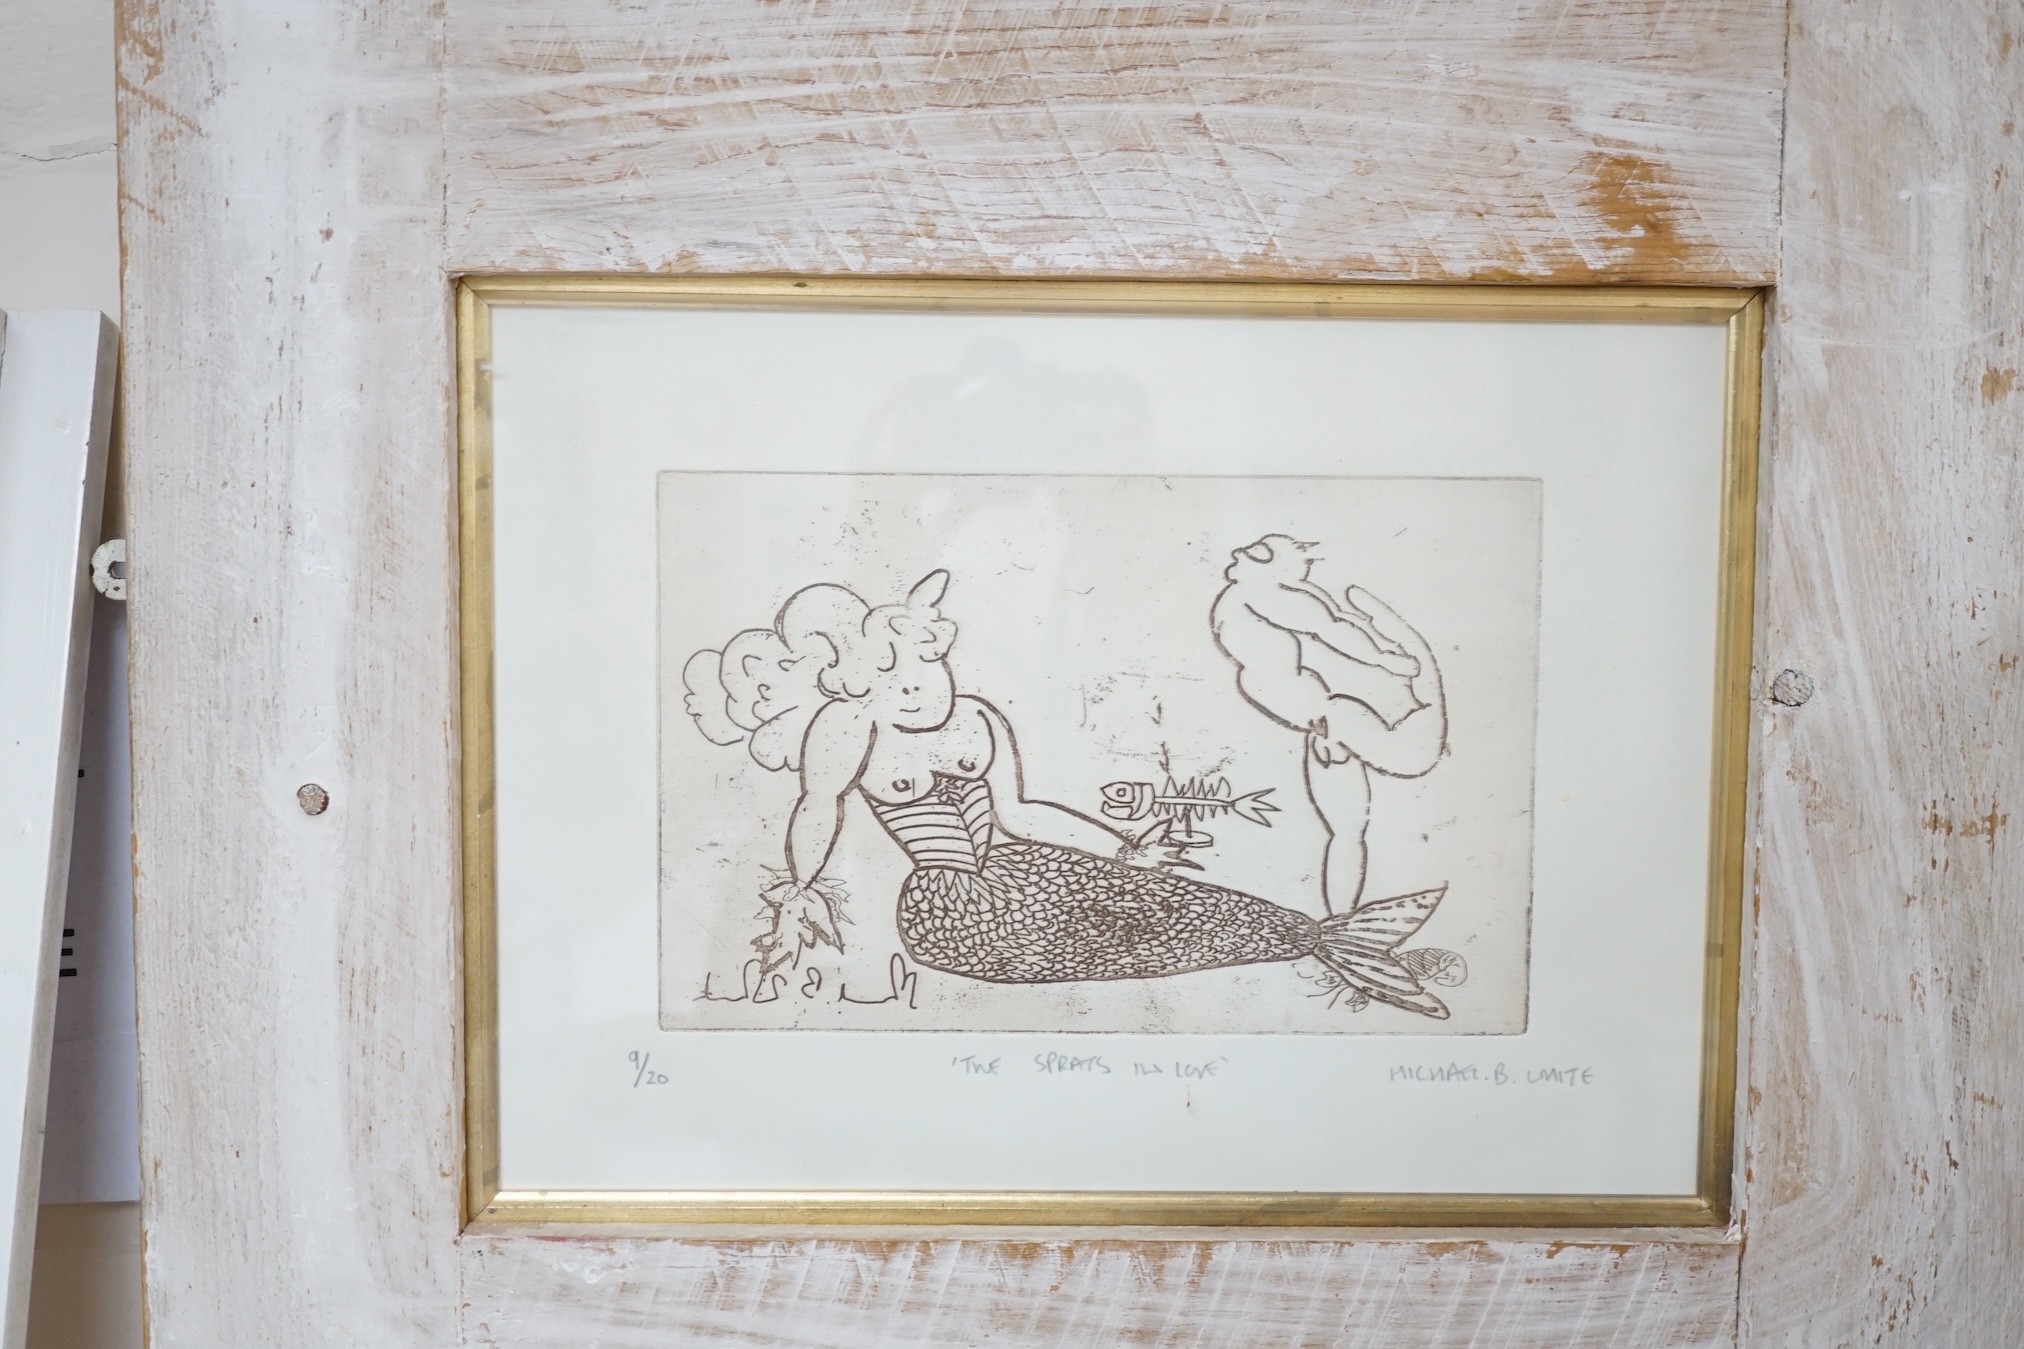 From the Studio of Fred Cuming. Michael B. White (Sussex artist), etching, 'Two Sprats In Love', signed in pencil, limited edition 9/20, 27 x 37cm. Condition - fair